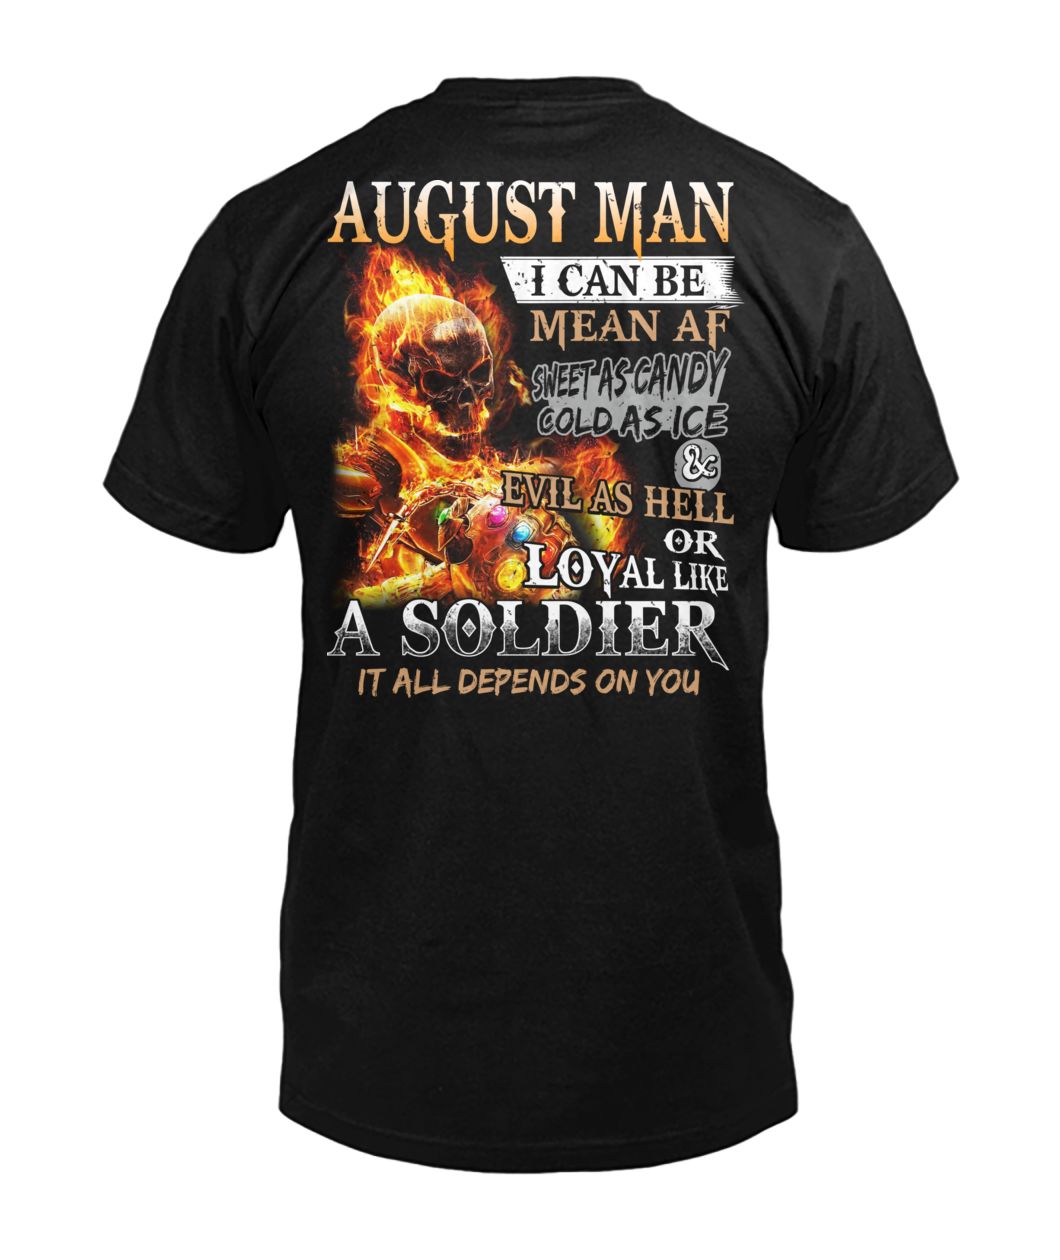 August man I can be mean af sweet as candy gold as ice and evil as hell mens v-neck